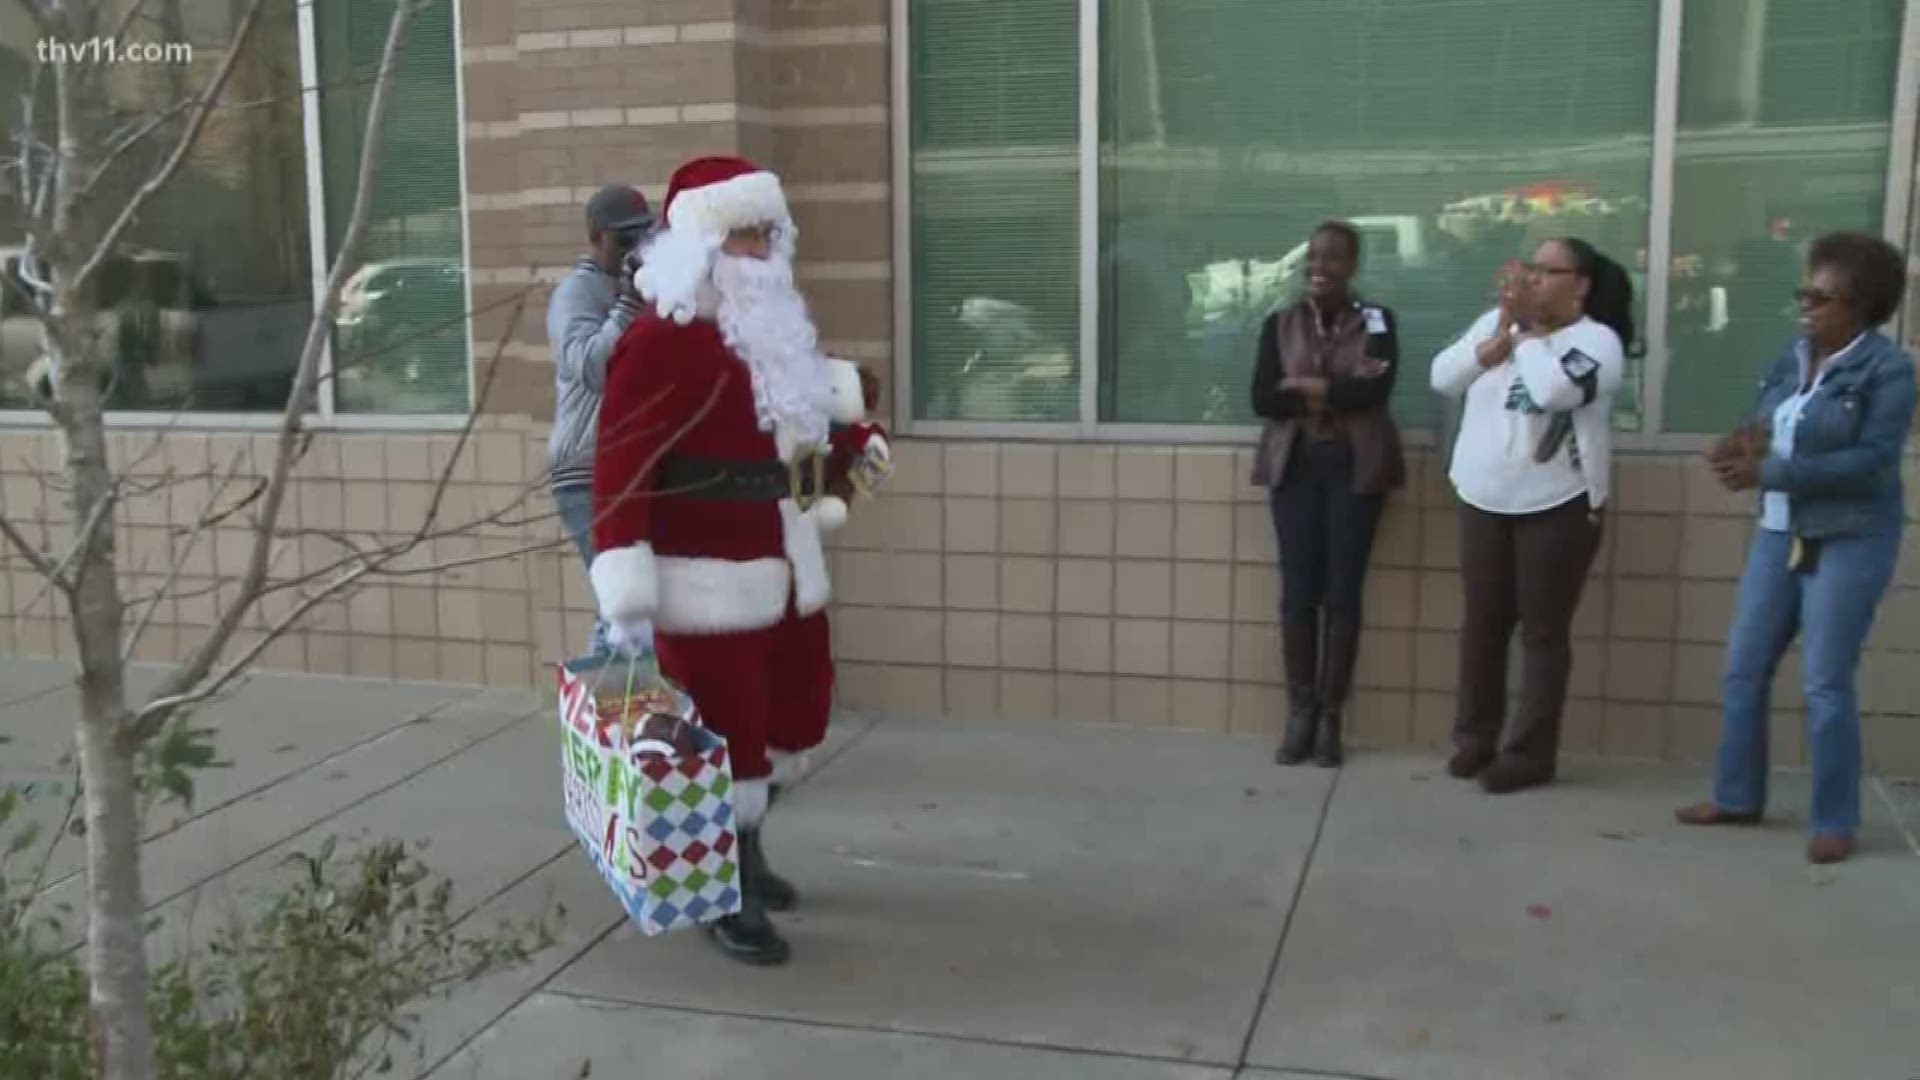 Children in state foster care got an extra special visit from Santa, firefighters, and their friends at the Arkansas Department of Human Services.